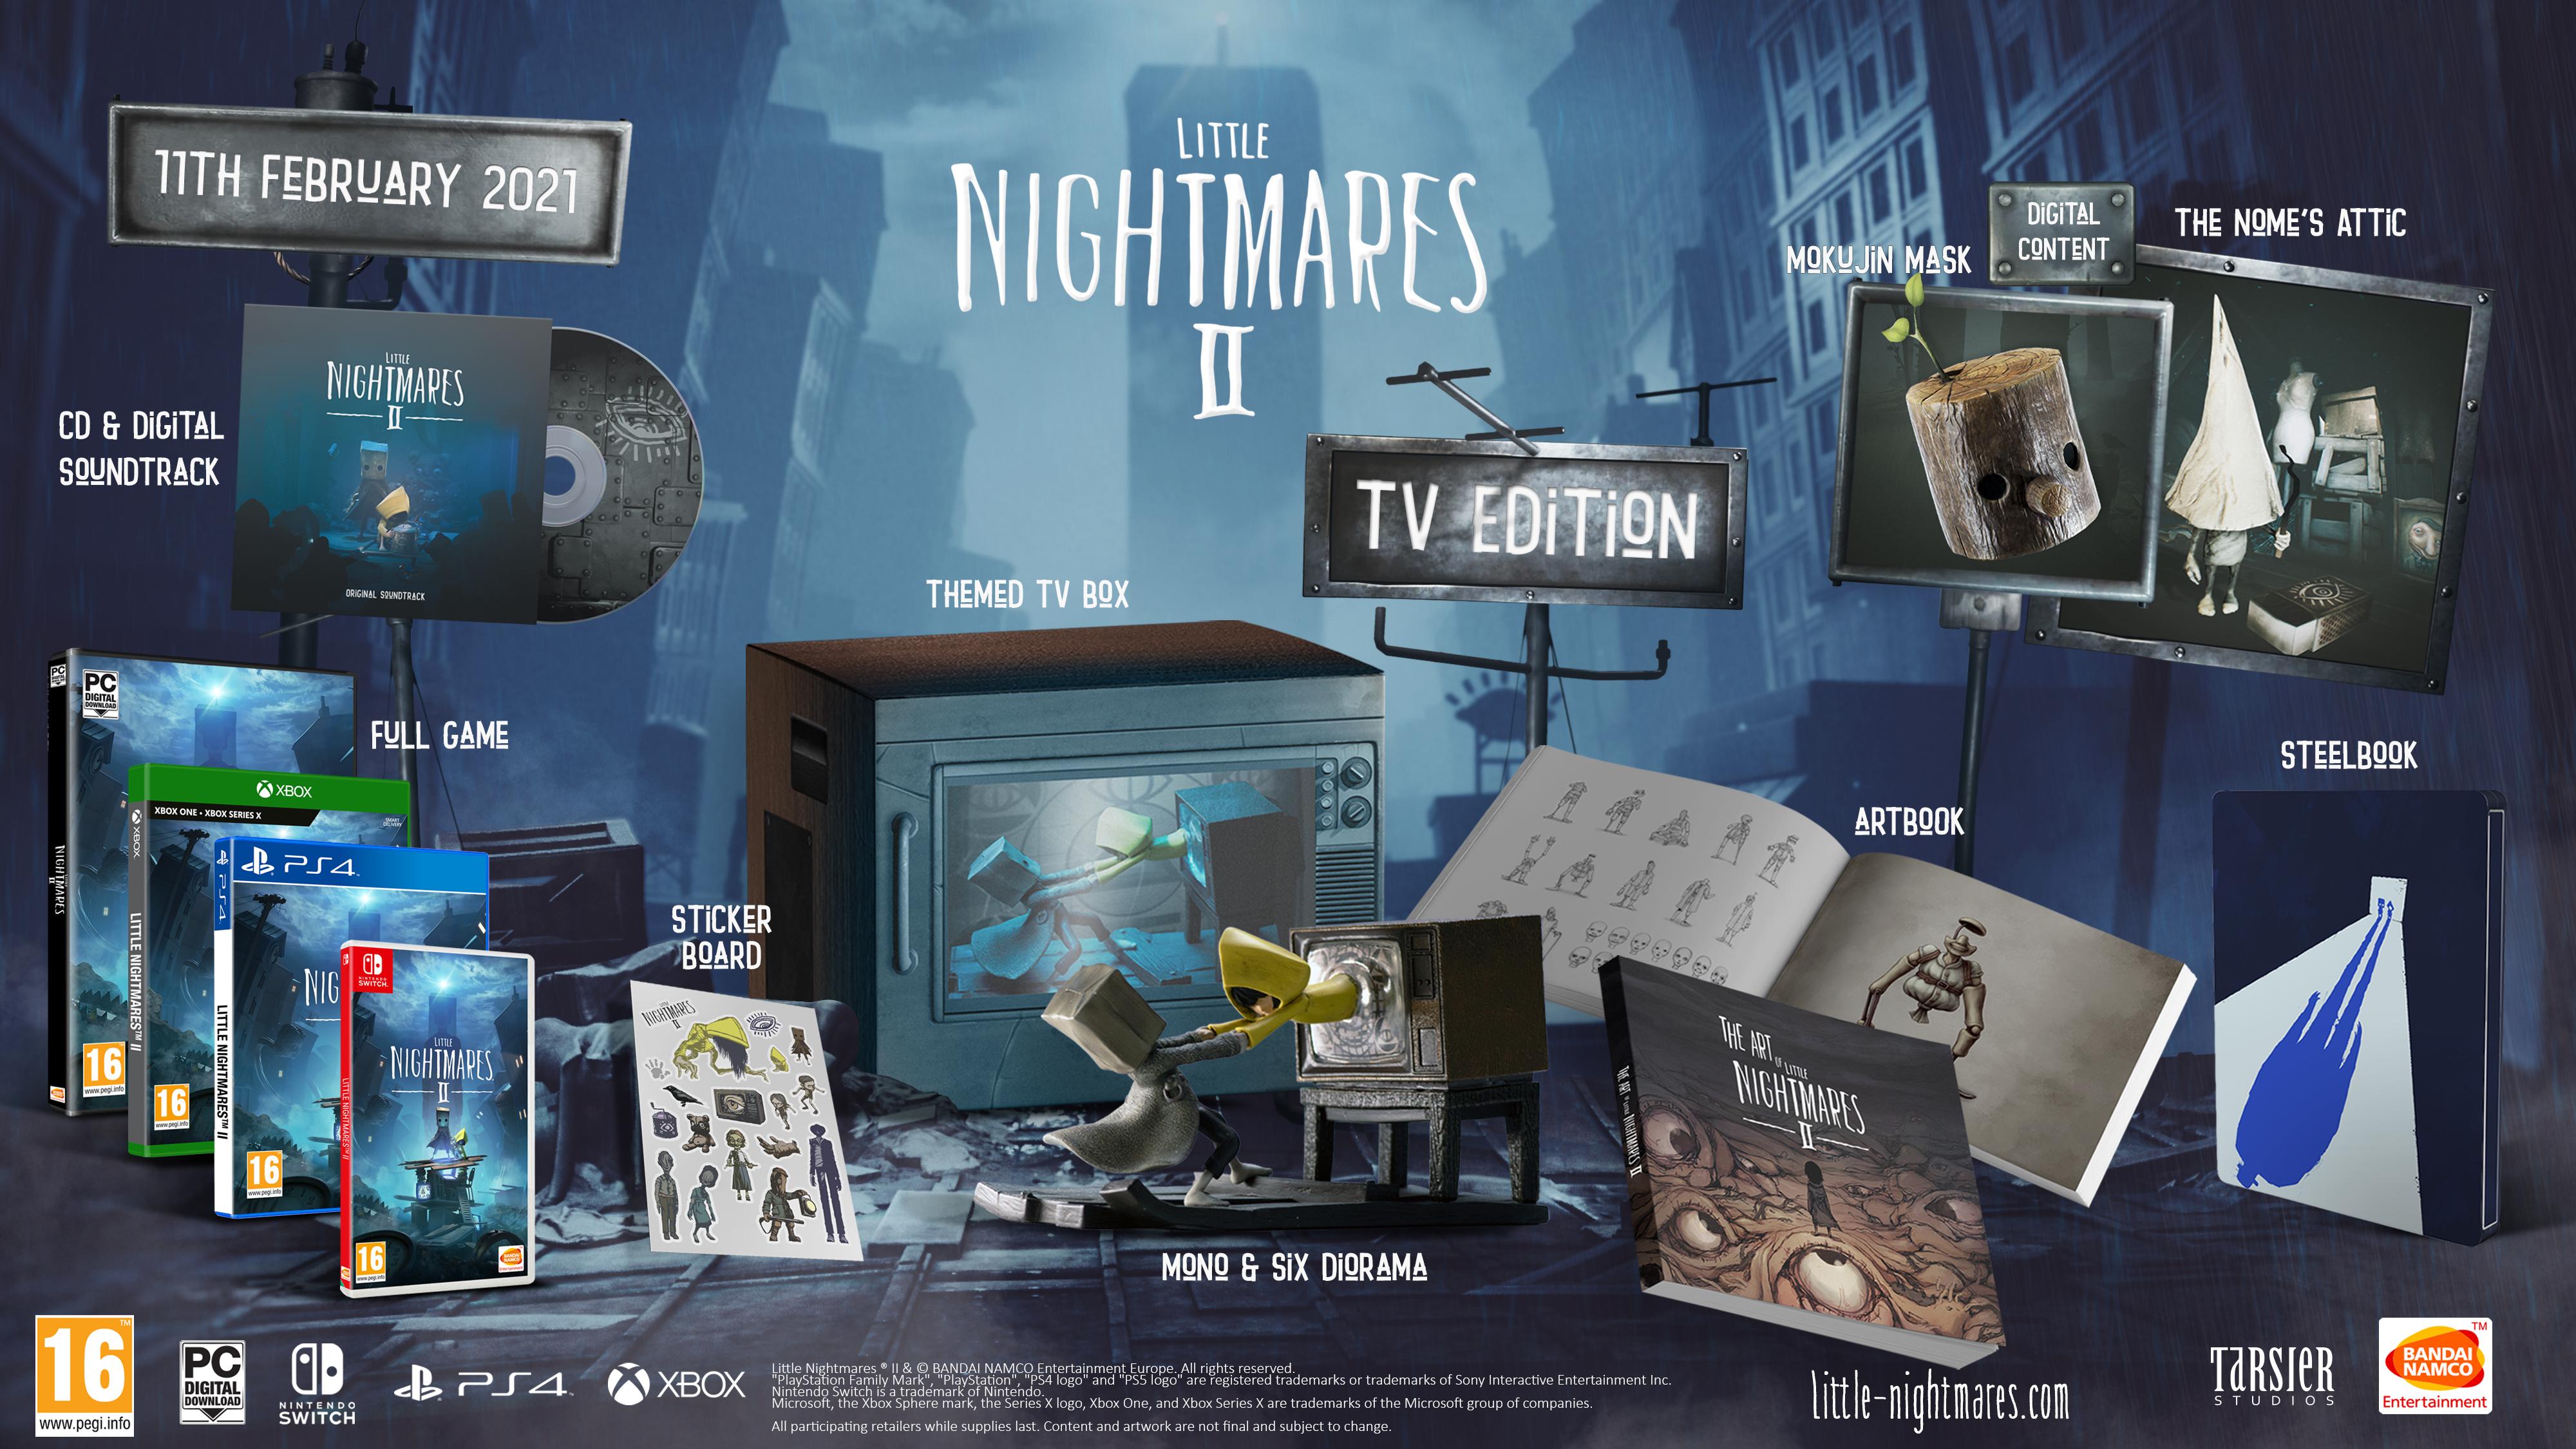 13 Differences Between Little Nightmares 1 And 2